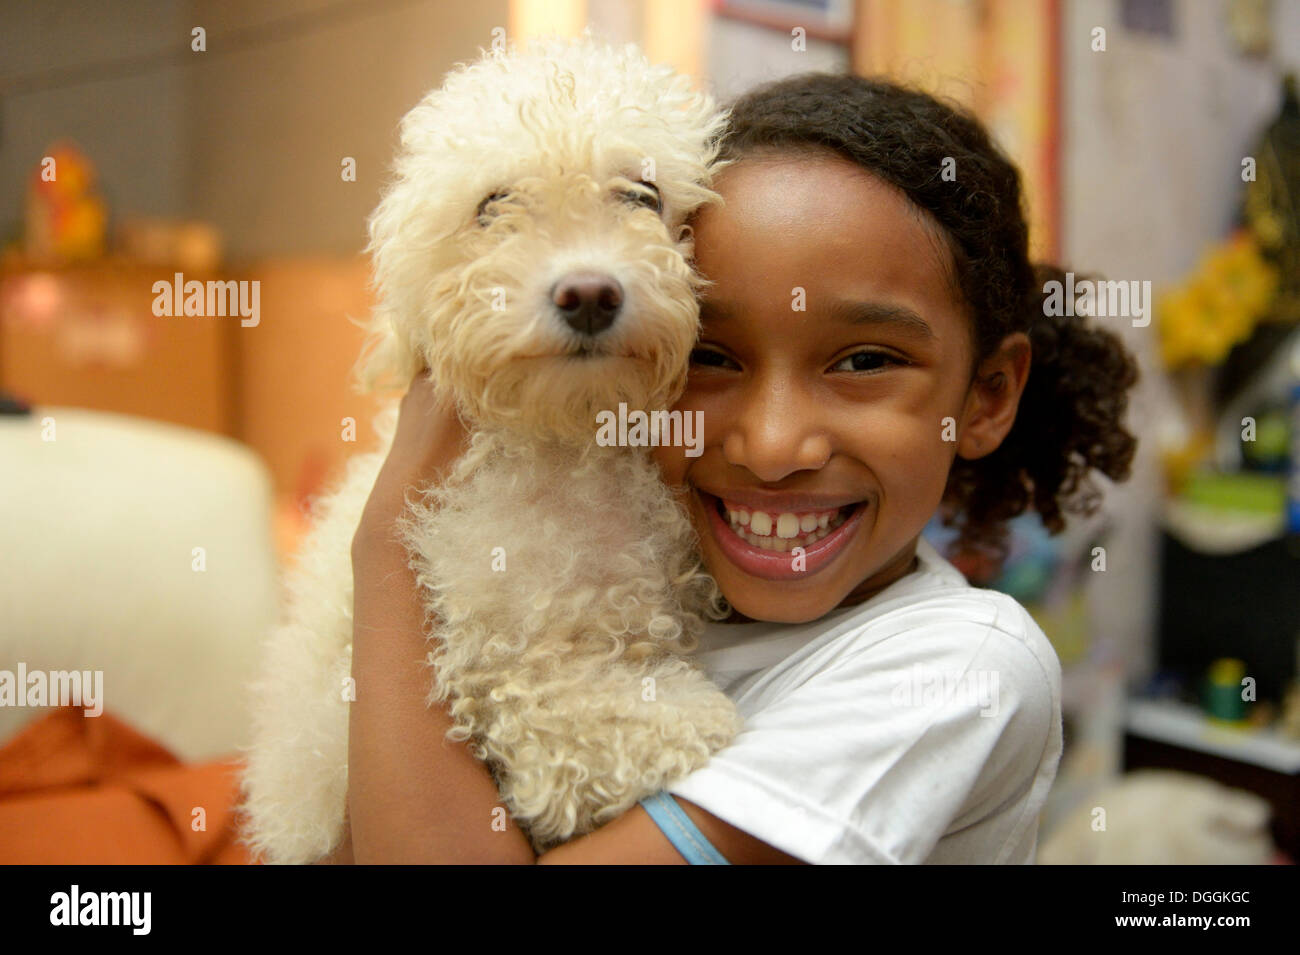 Girl with a poodle in a slum or favela, Jacarezinho favela, Rio de Janeiro, Rio de Janeiro State, Brazil Stock Photo